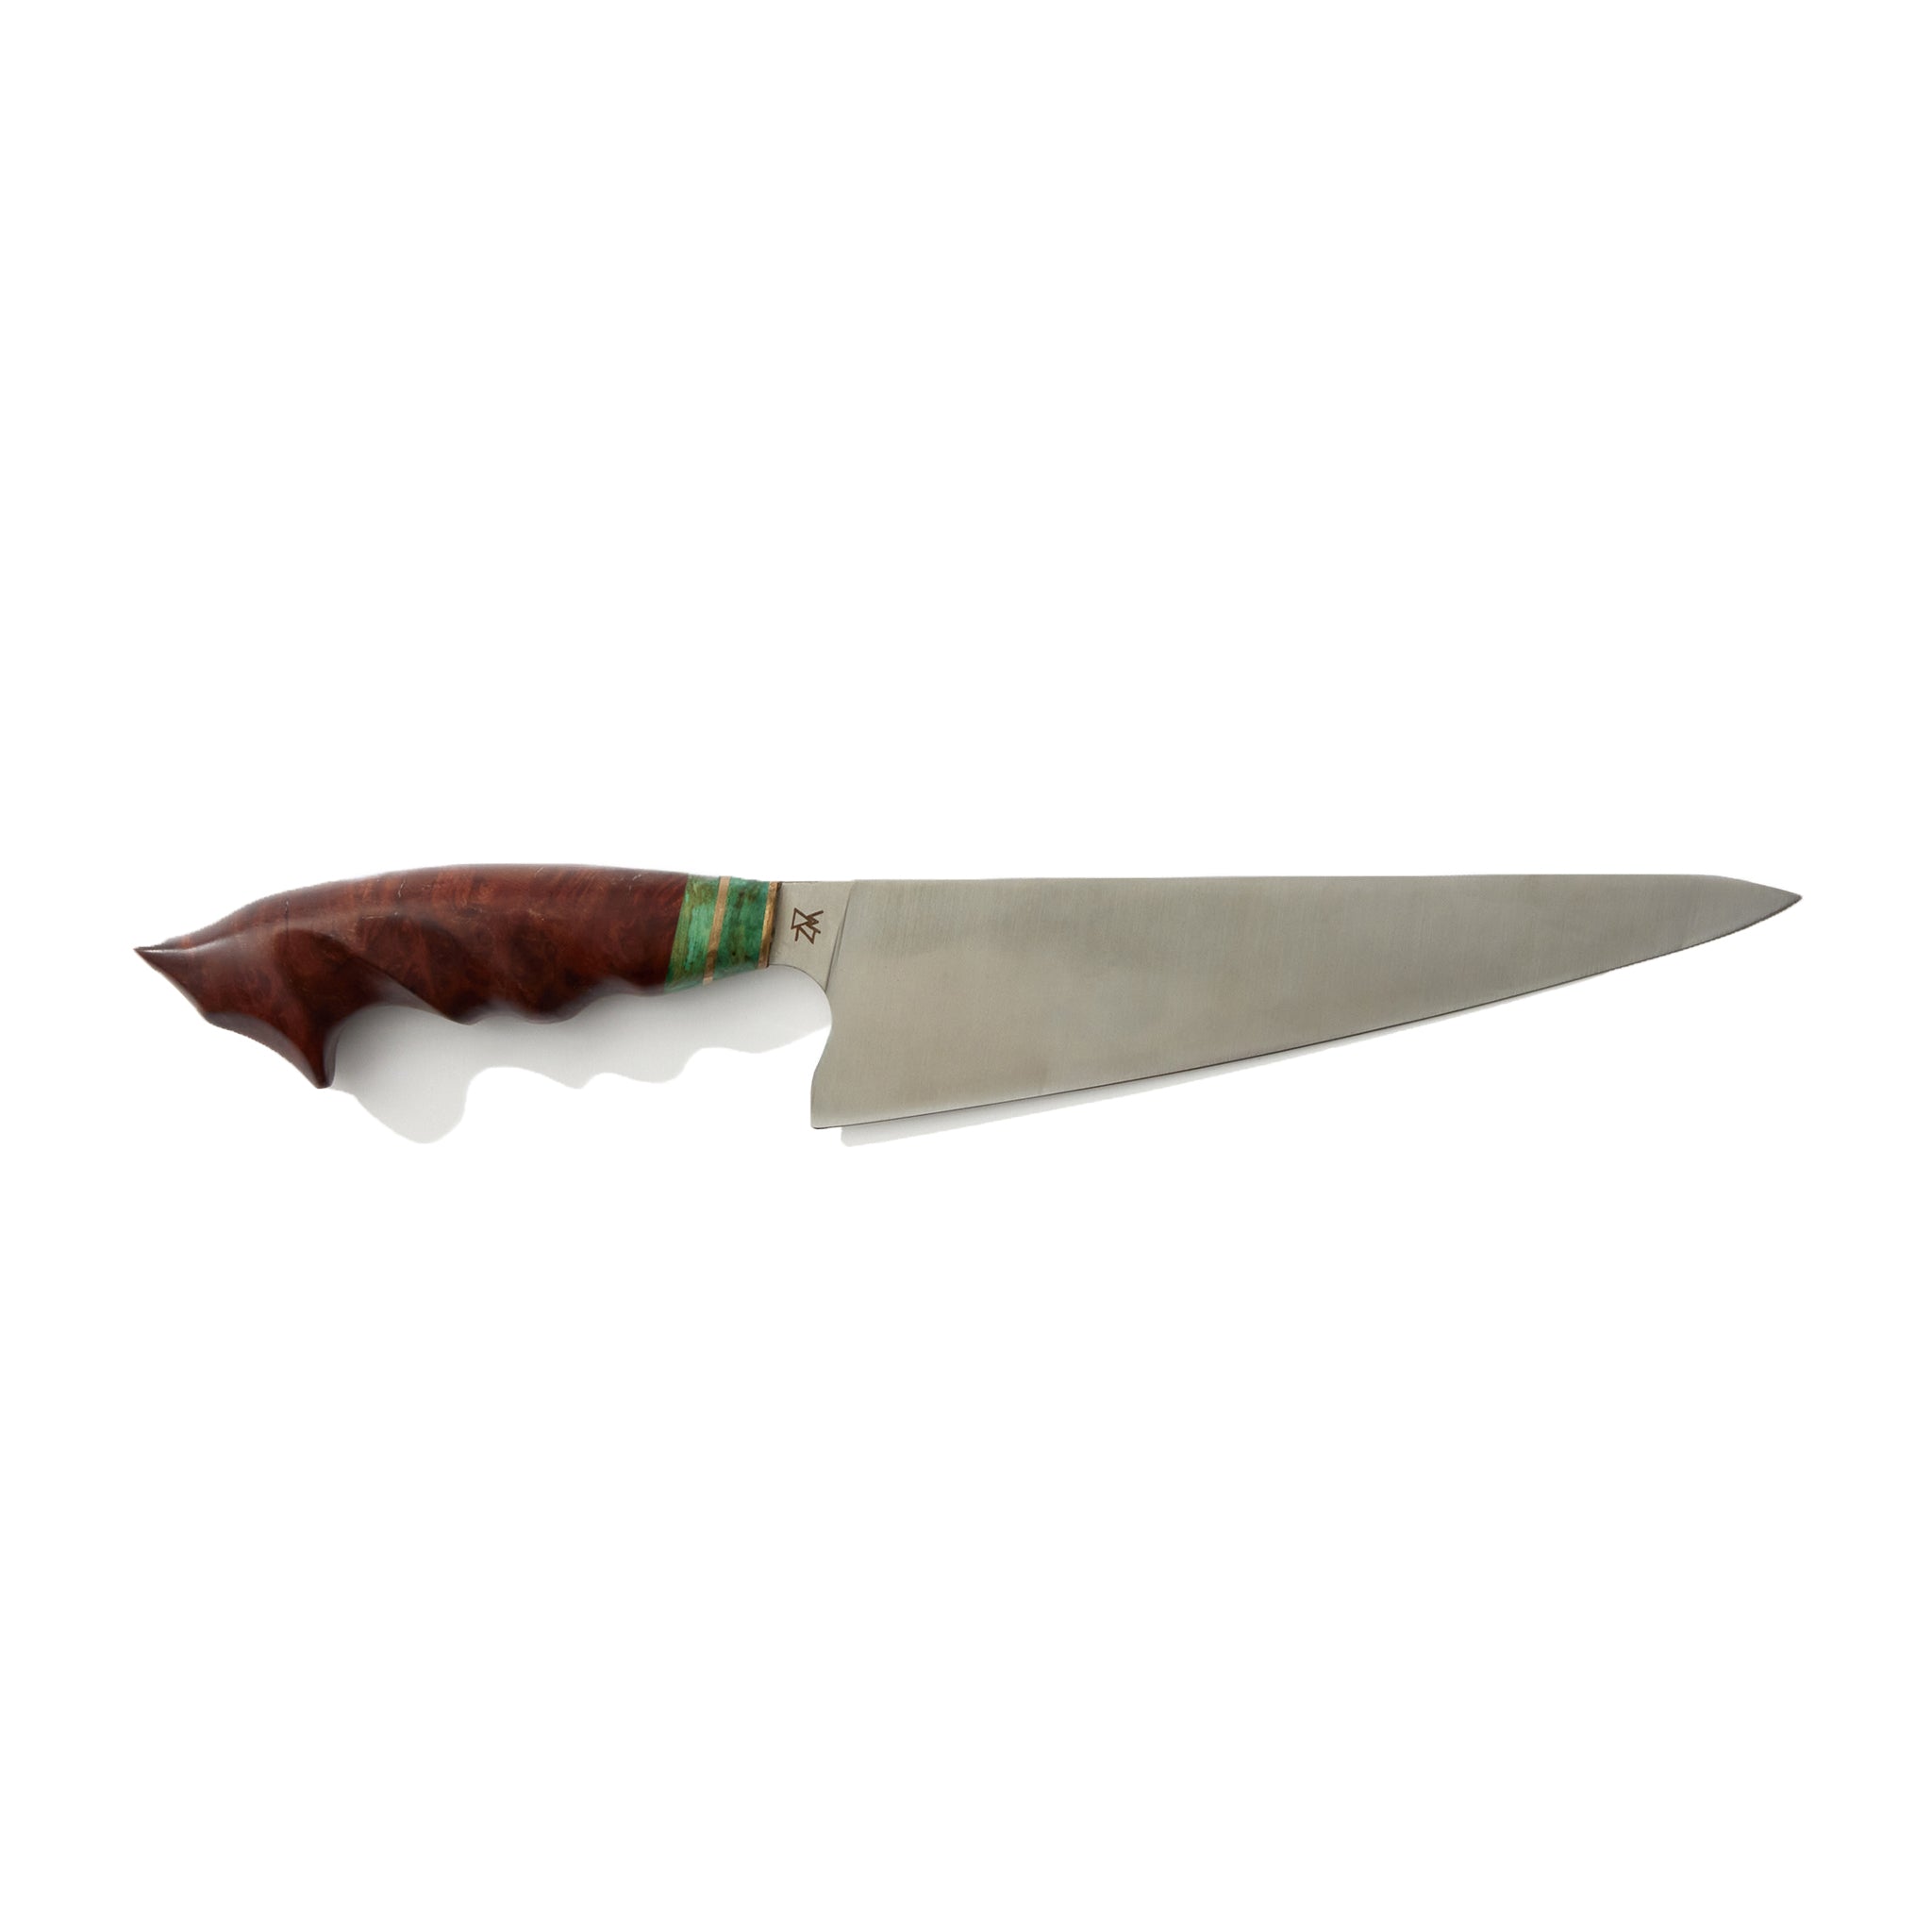 An eight-inch chef's knife with a straight, pointed blade and a decorative, ergonomic handle. The handle has a deep brown color with a distinctive green striped pattern near the bolster, which separates the handle from the blade. The knife is positioned against a white background, highlighting its sharp edge and unique design.